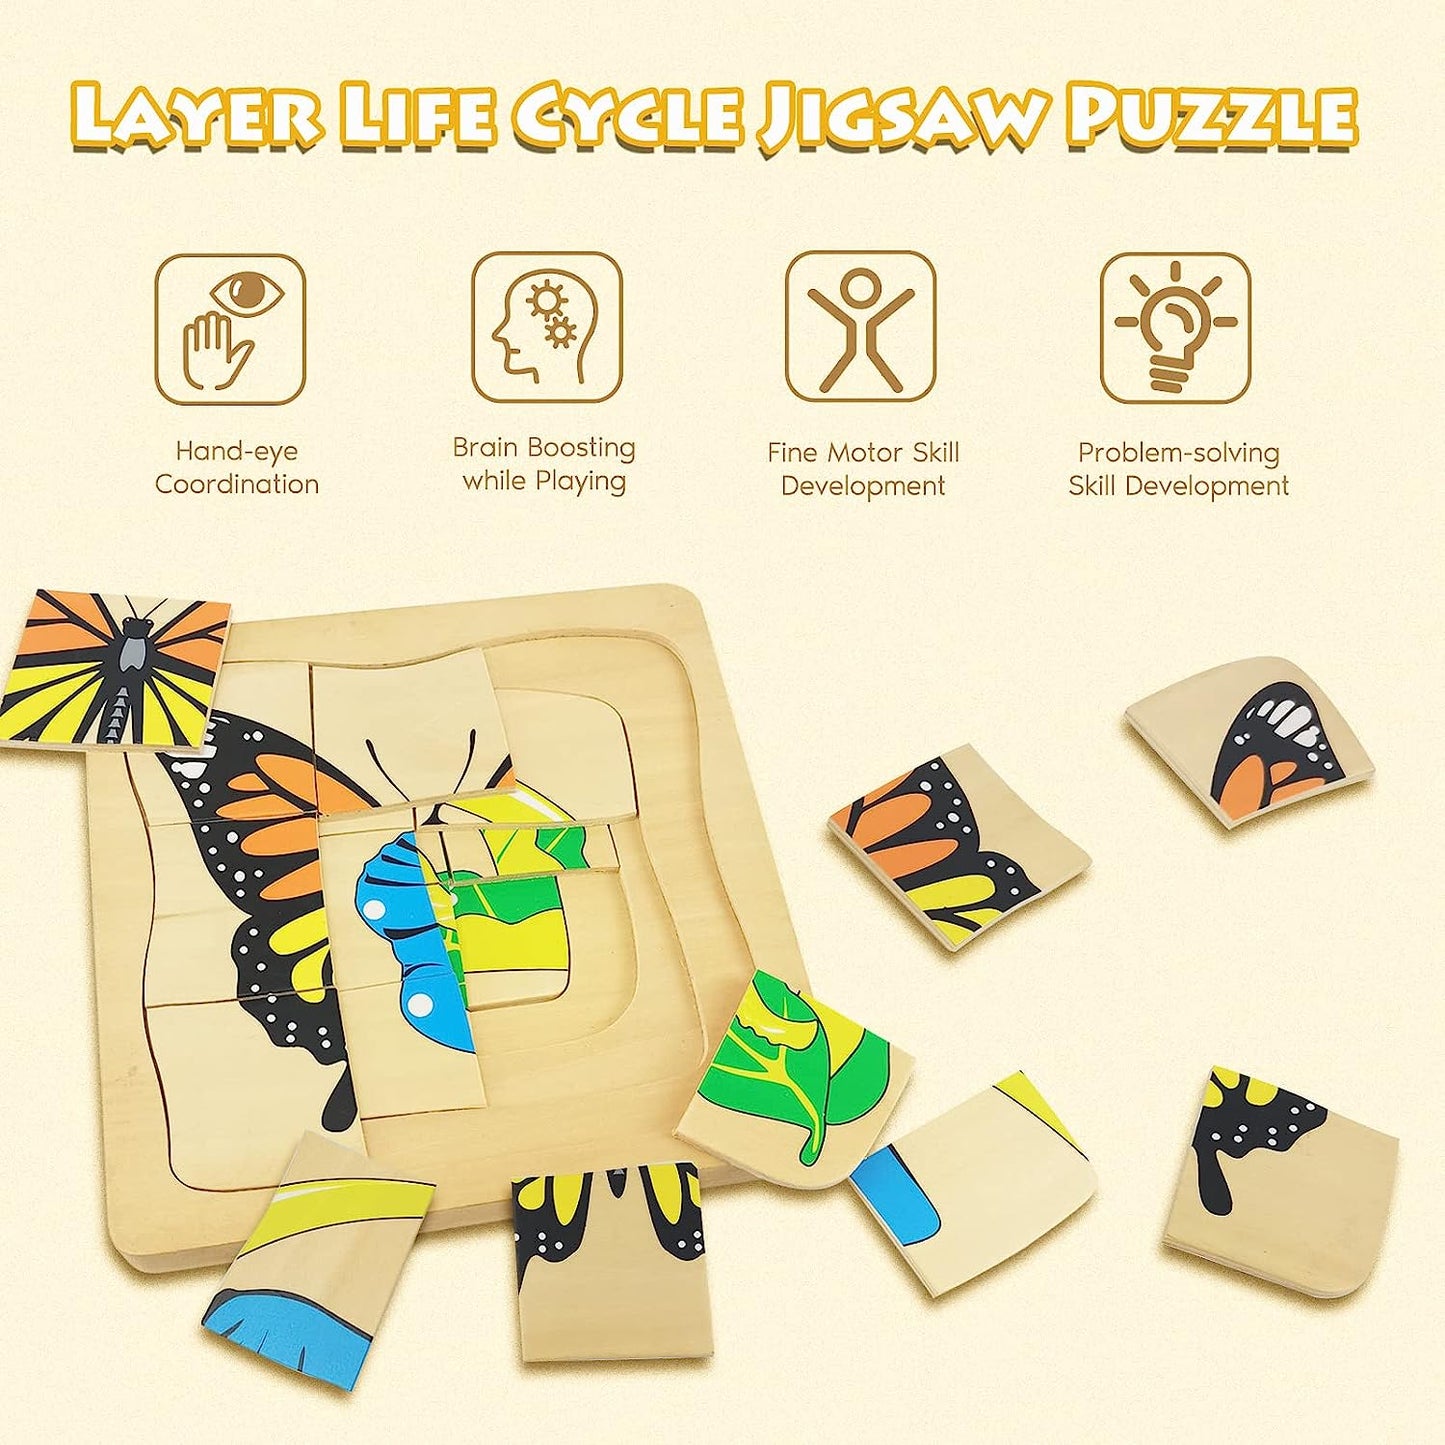 Wooden Puzzles for Kids Ages 4-8, 4 Layer Life Cycle of Butterfly Jigsaw Puzzle for Toddlers, Children Preschool Learning Educational Puzzles Toys for Boys and Girls (Butterfly)